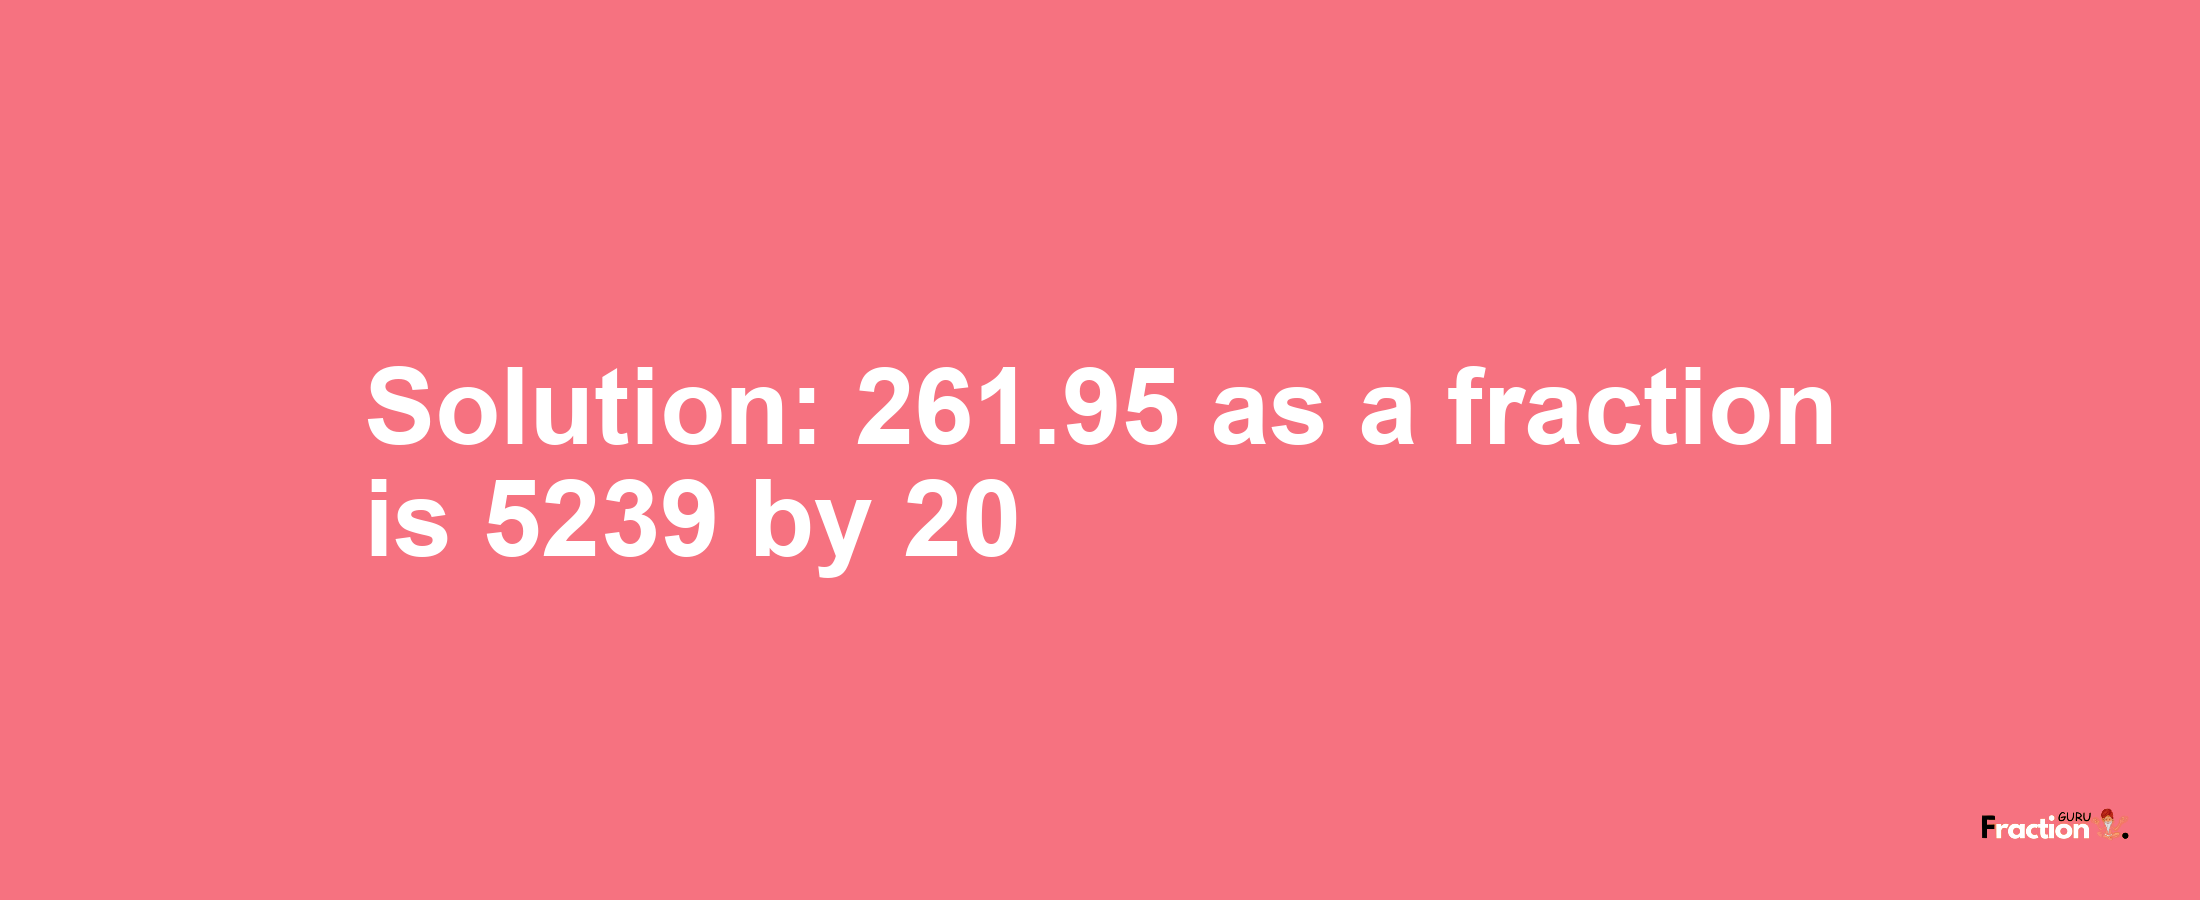 Solution:261.95 as a fraction is 5239/20